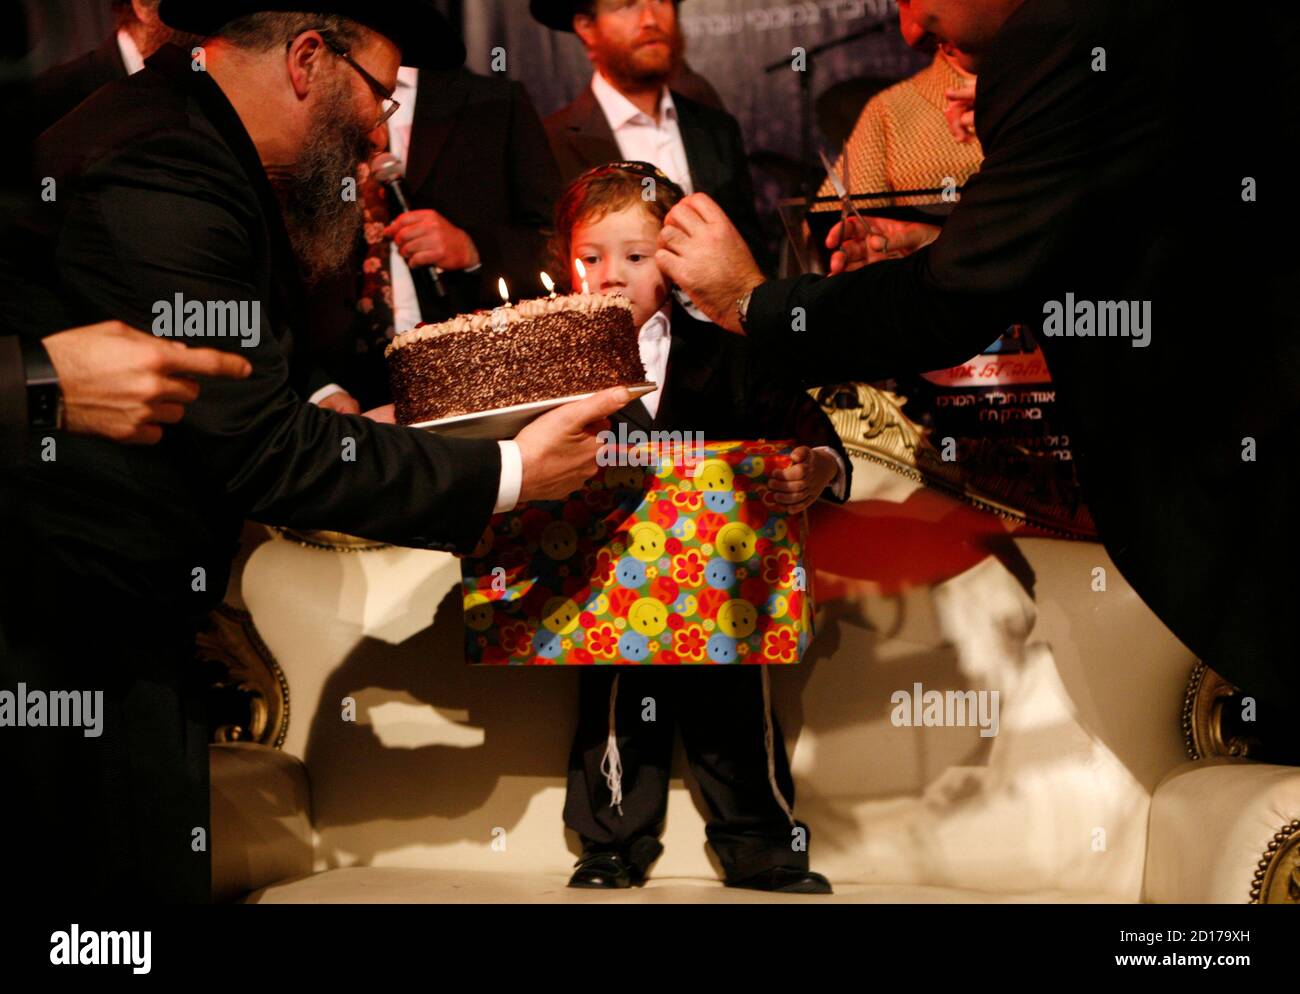 Ultra-Orthodox Jews cut the hair of Moishe Holtzberg, and present him with  presents and a cake during the Halake ceremony in Kfar Chabad, near Tel  Aviv, November 18, 2009. Moishe is the